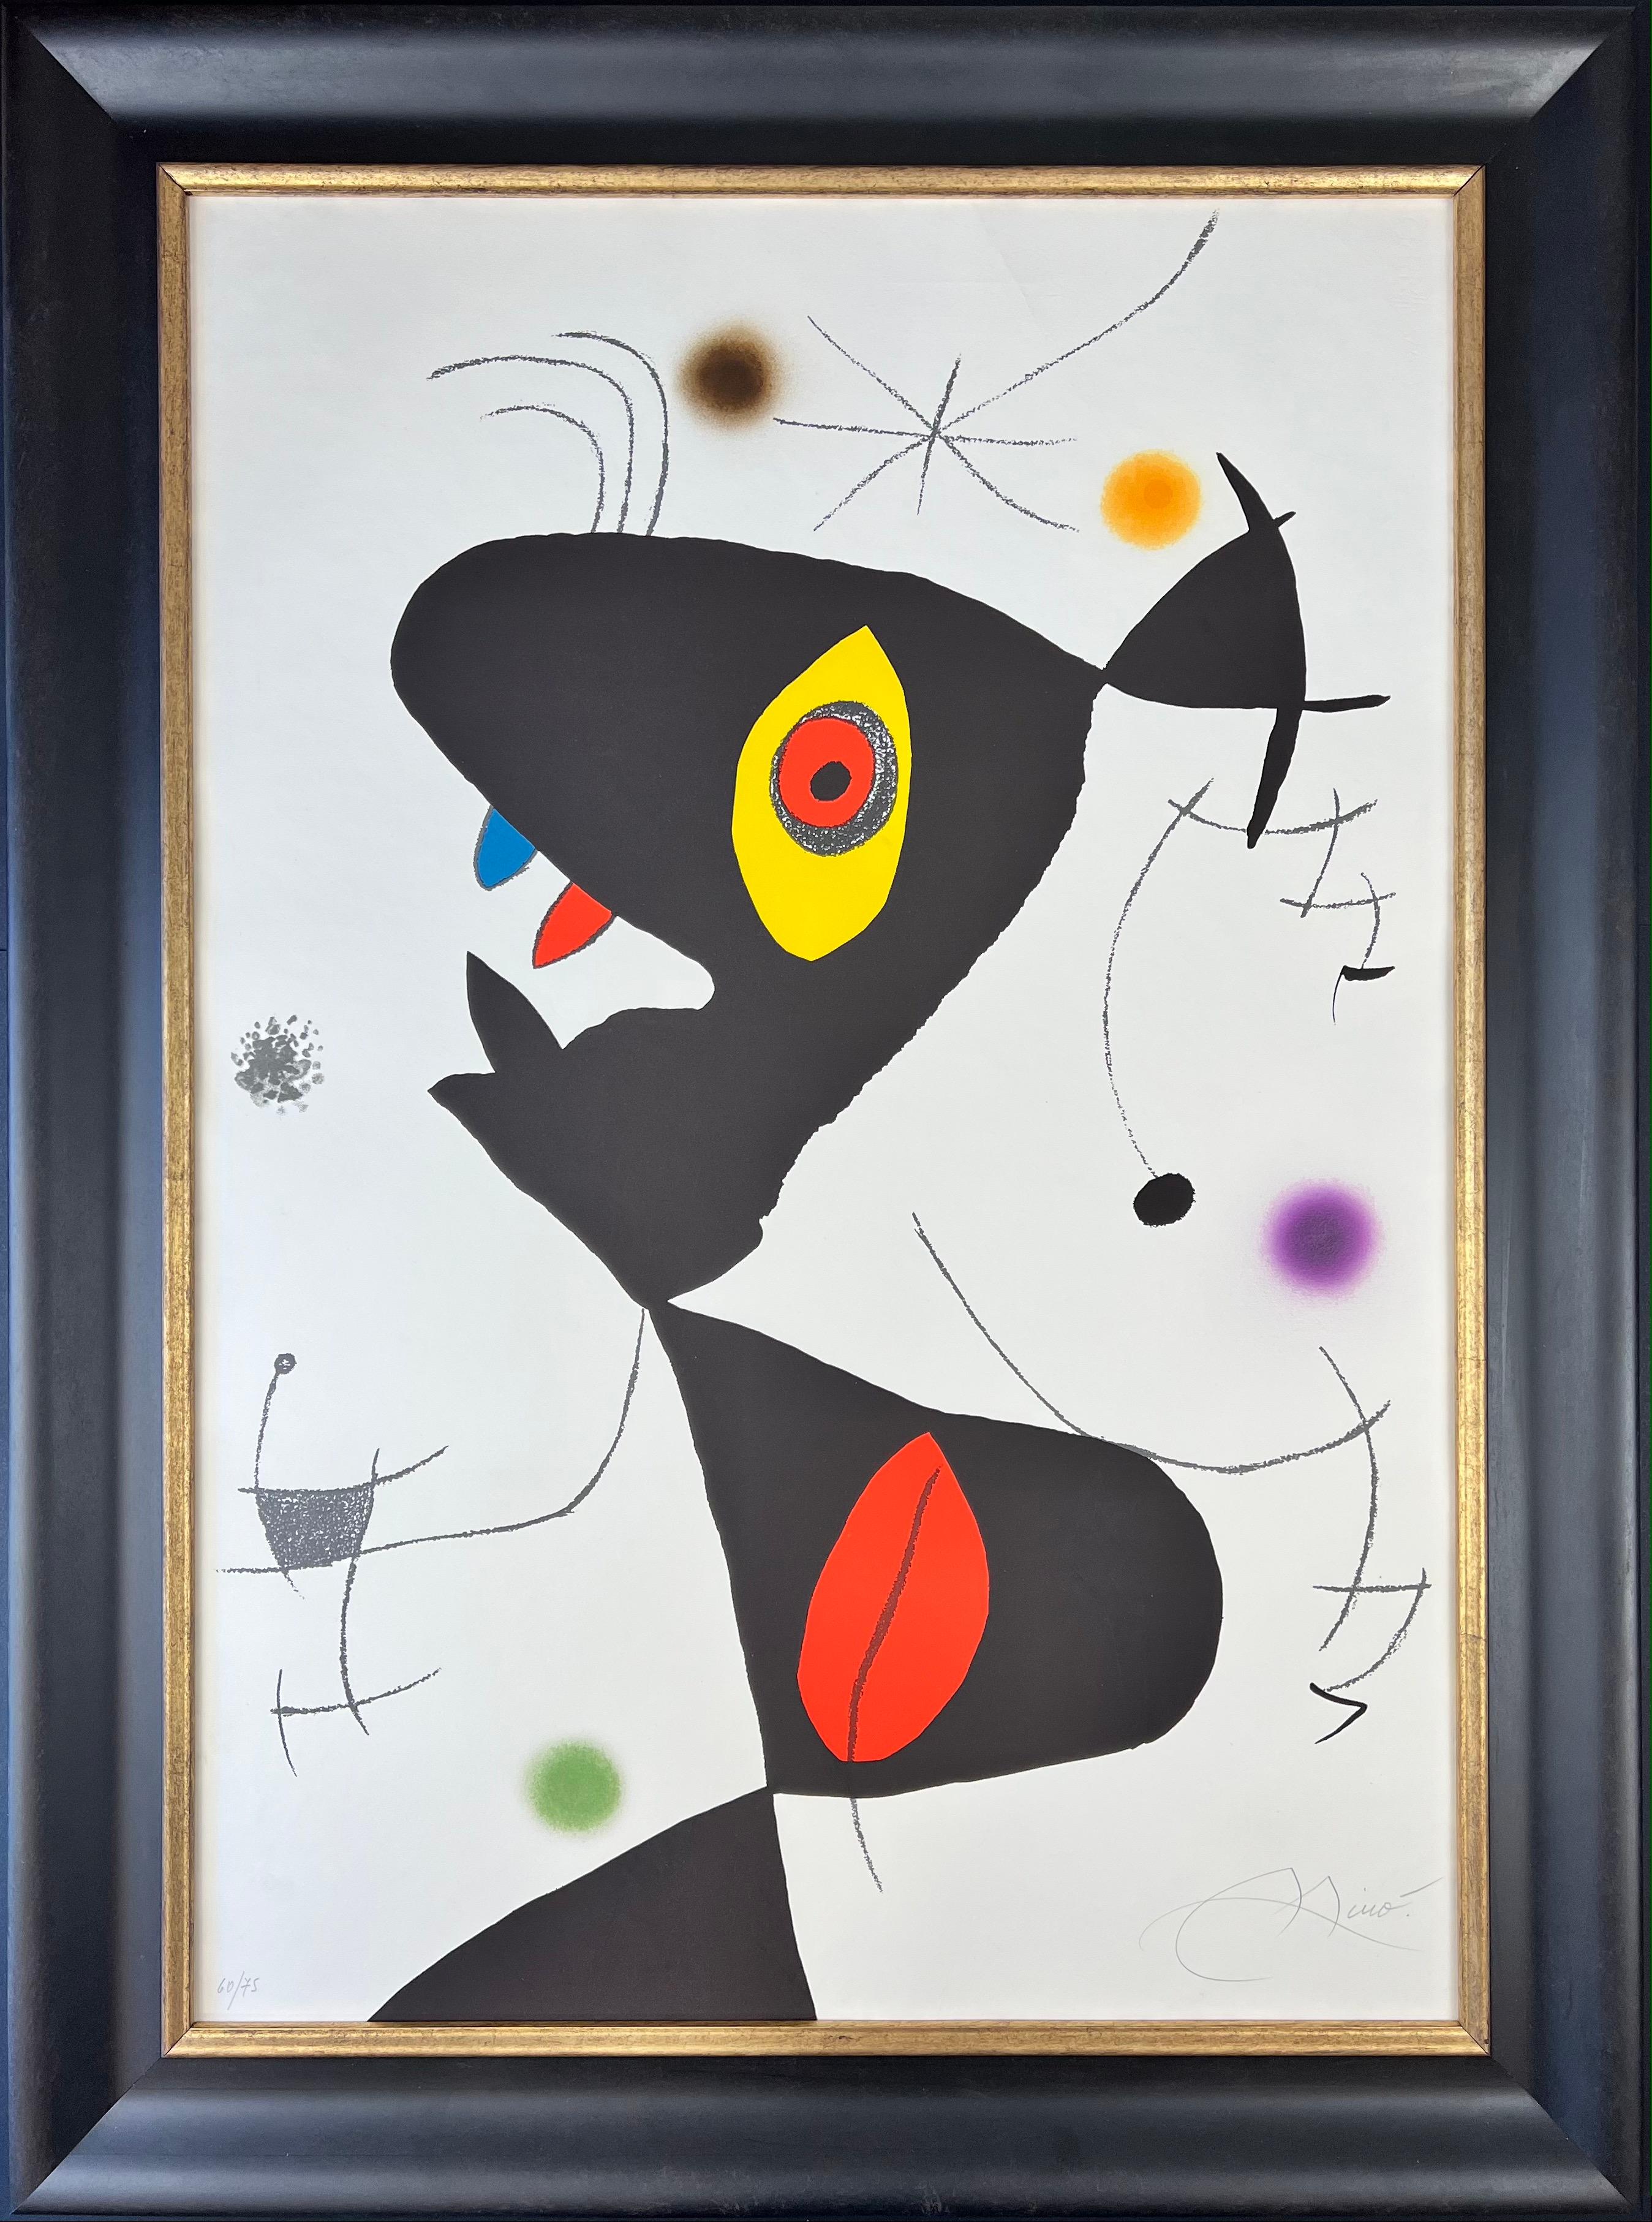 Color lithograph on Guarro paper, edited in 1973
Limited edition of 75 copies
signed in pencil by artist in lower right corner and numbered 60/75 in lower left corner
Framed size: 102,5 x 76 cm
Paper size: : 88 x 61 cm
a few scratches, overwise in